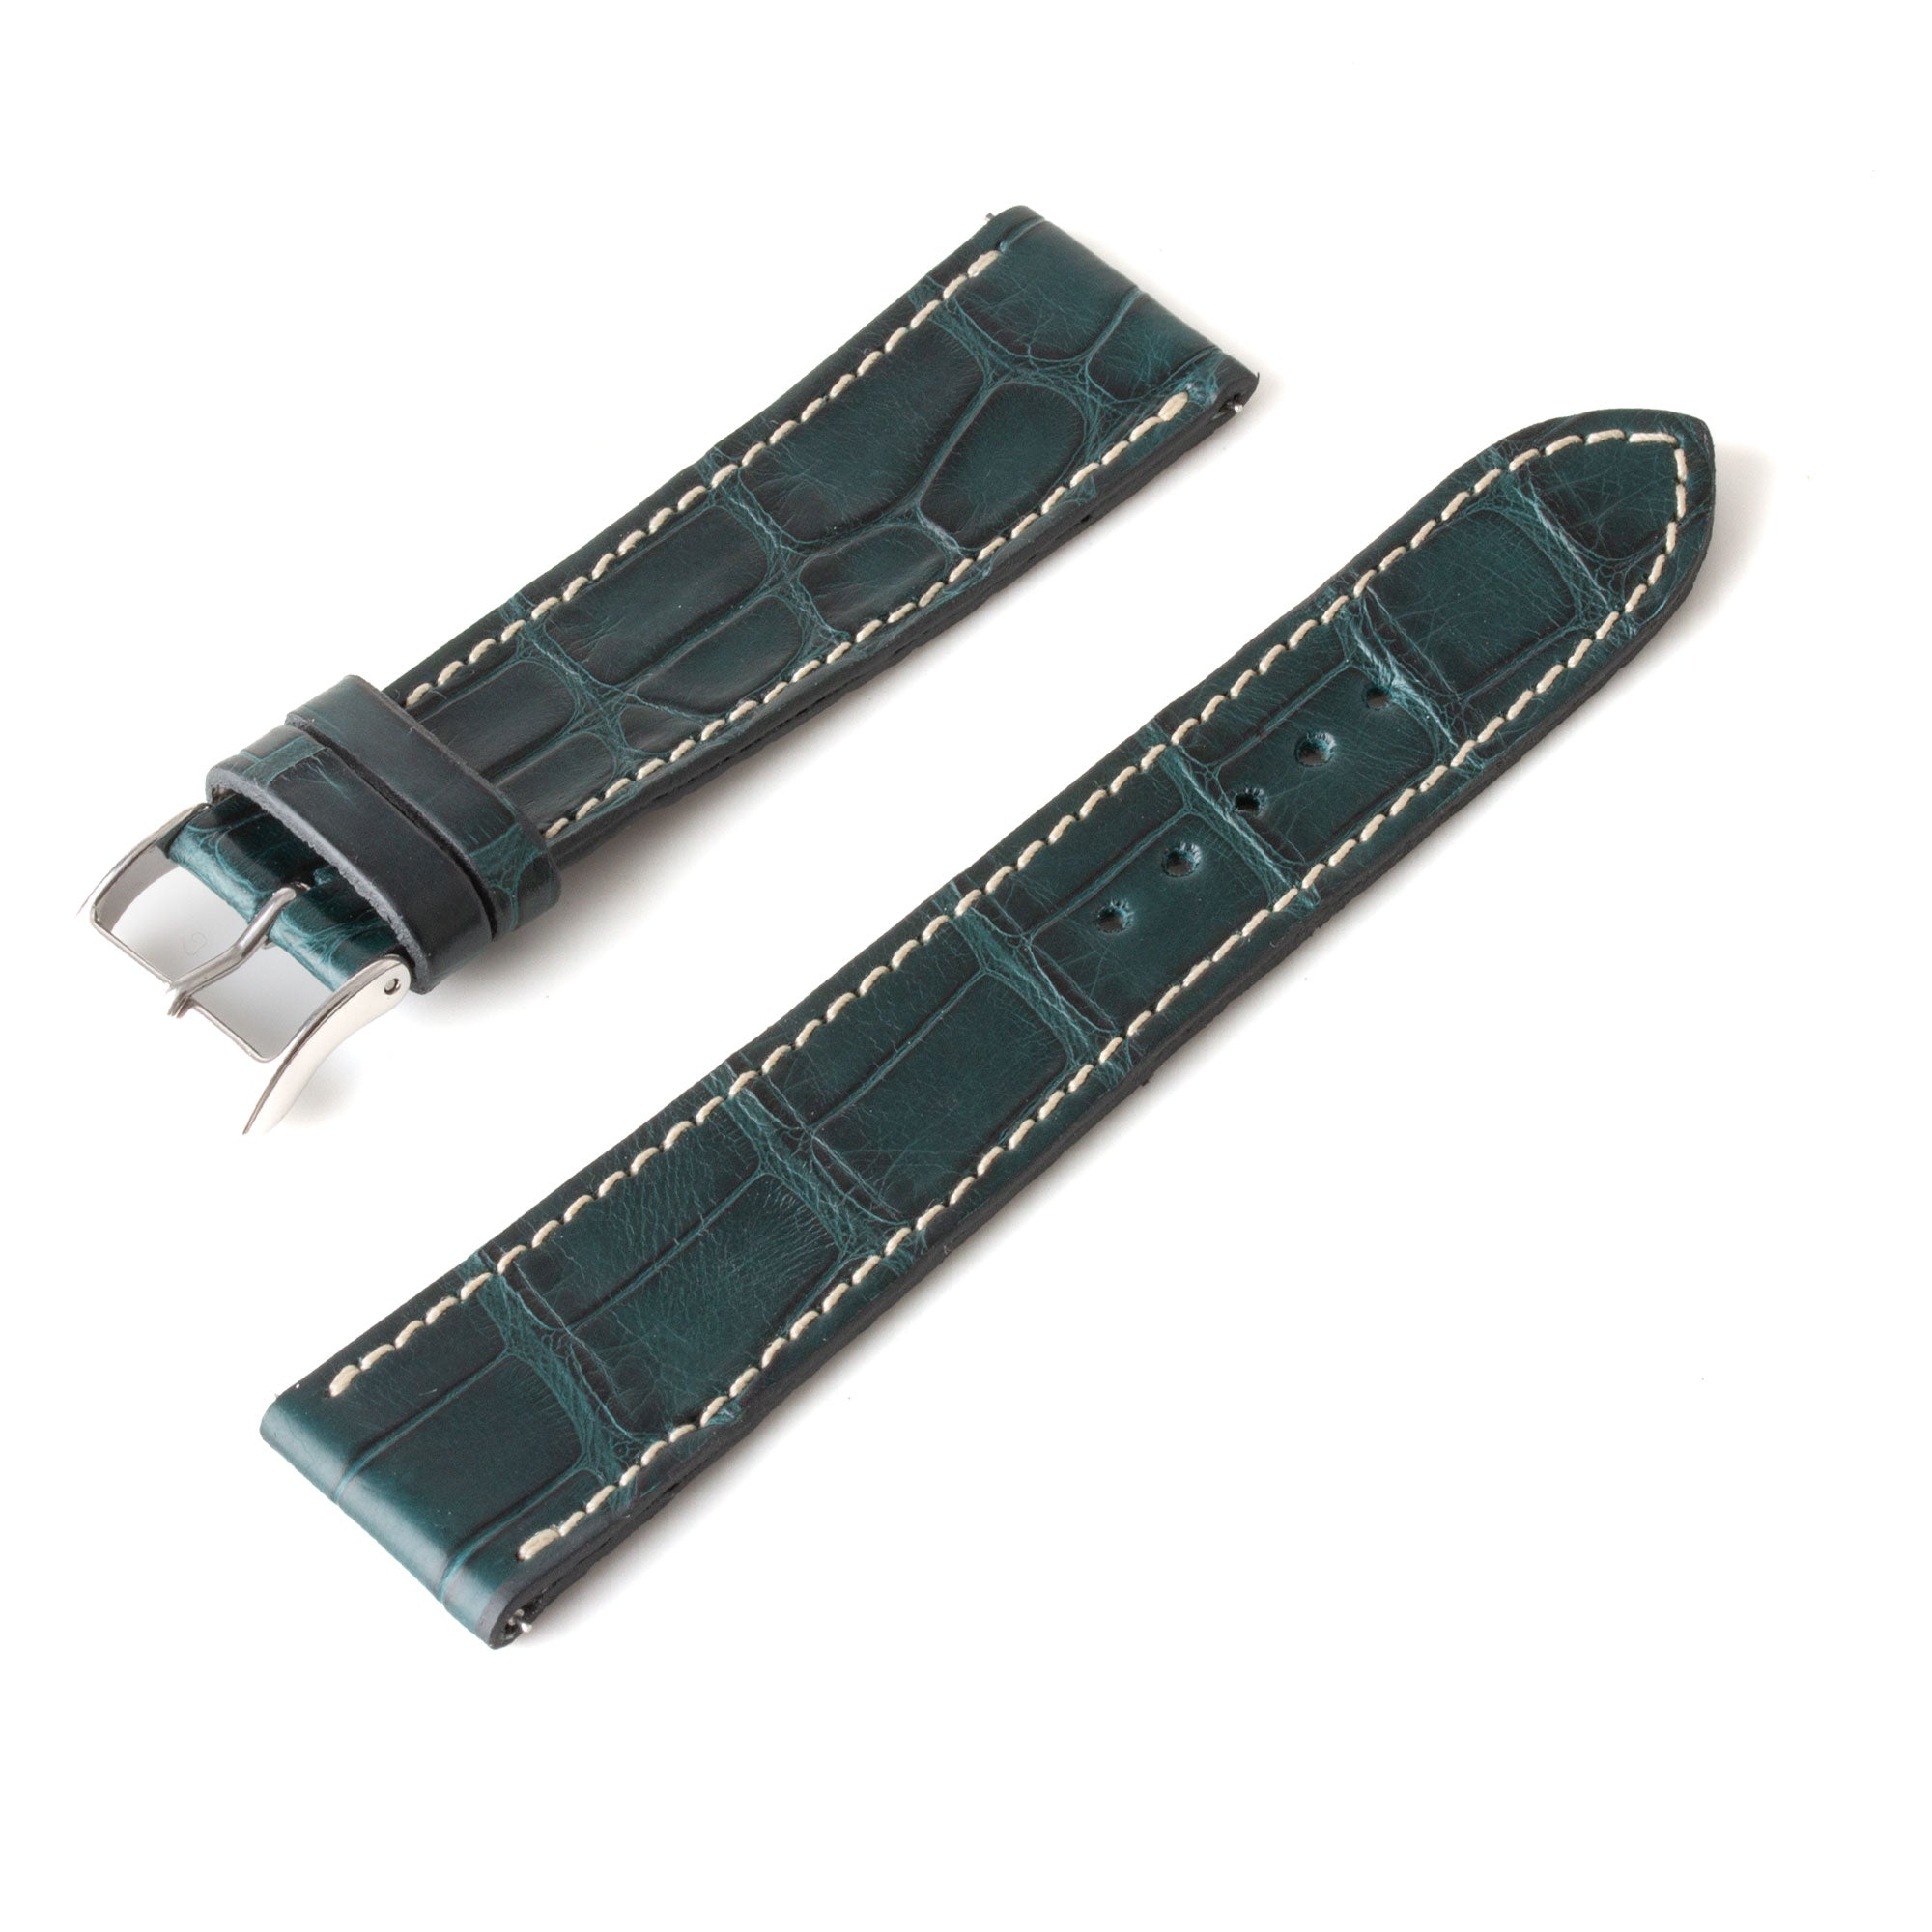 Alligator "Solo" leather watch band - 22mm width (0.87 inches) / Size M (n° 1)